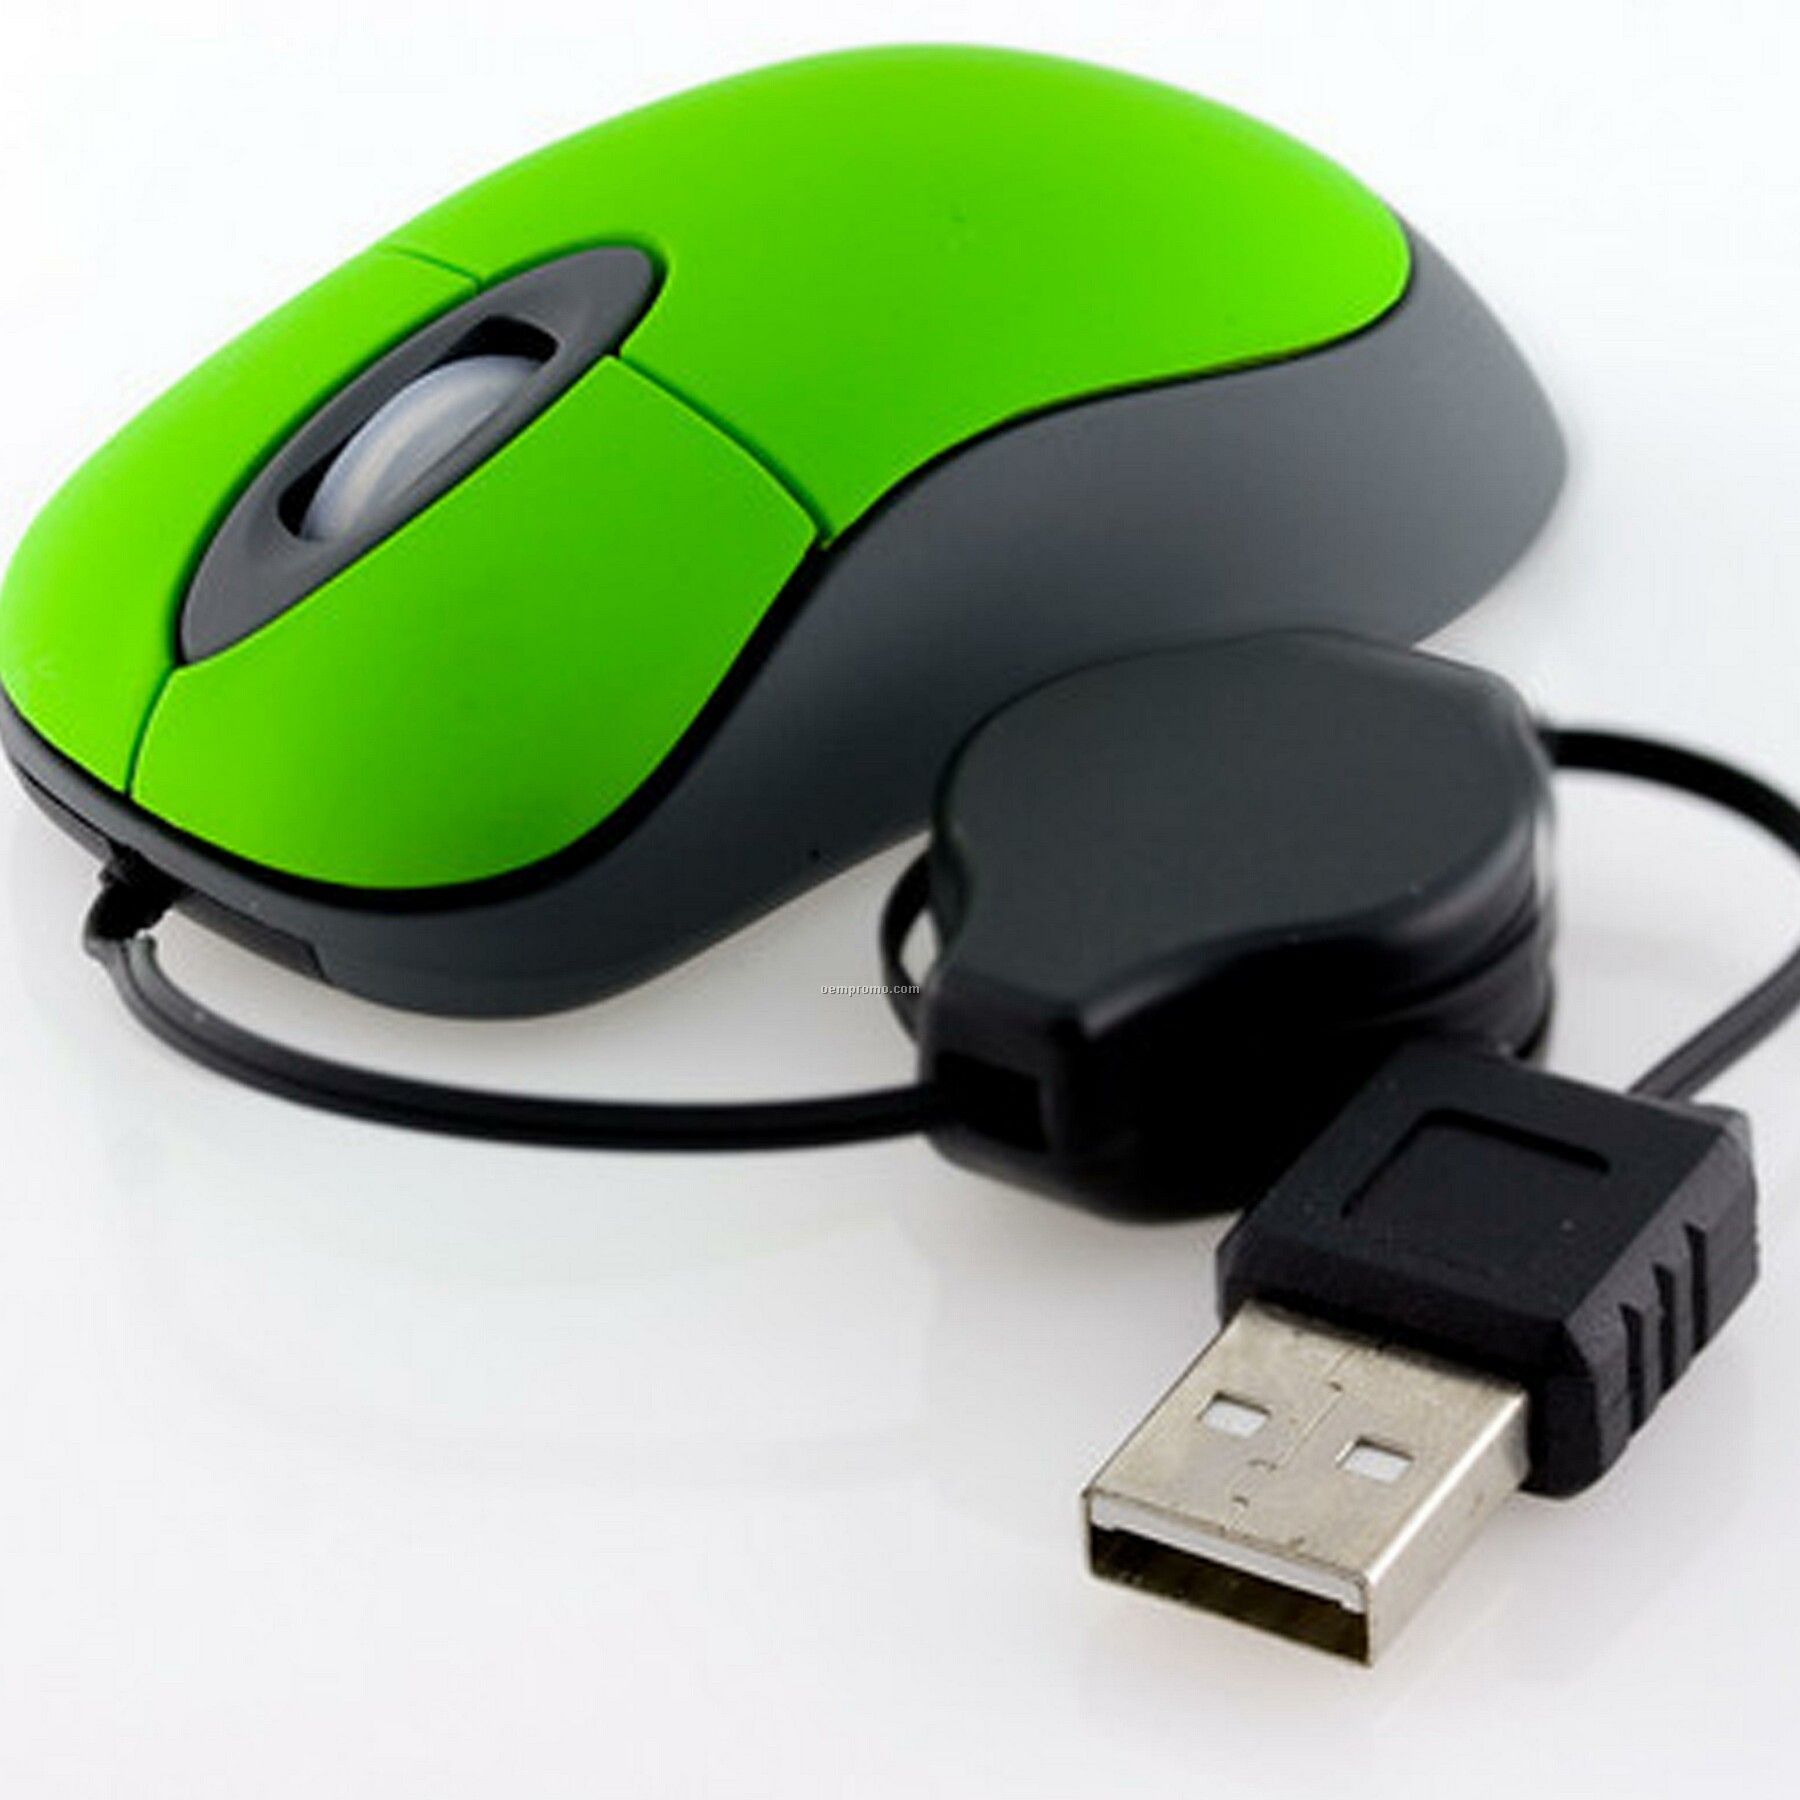 Fly USB Mini Optical Mouse W/ Retractable Cord